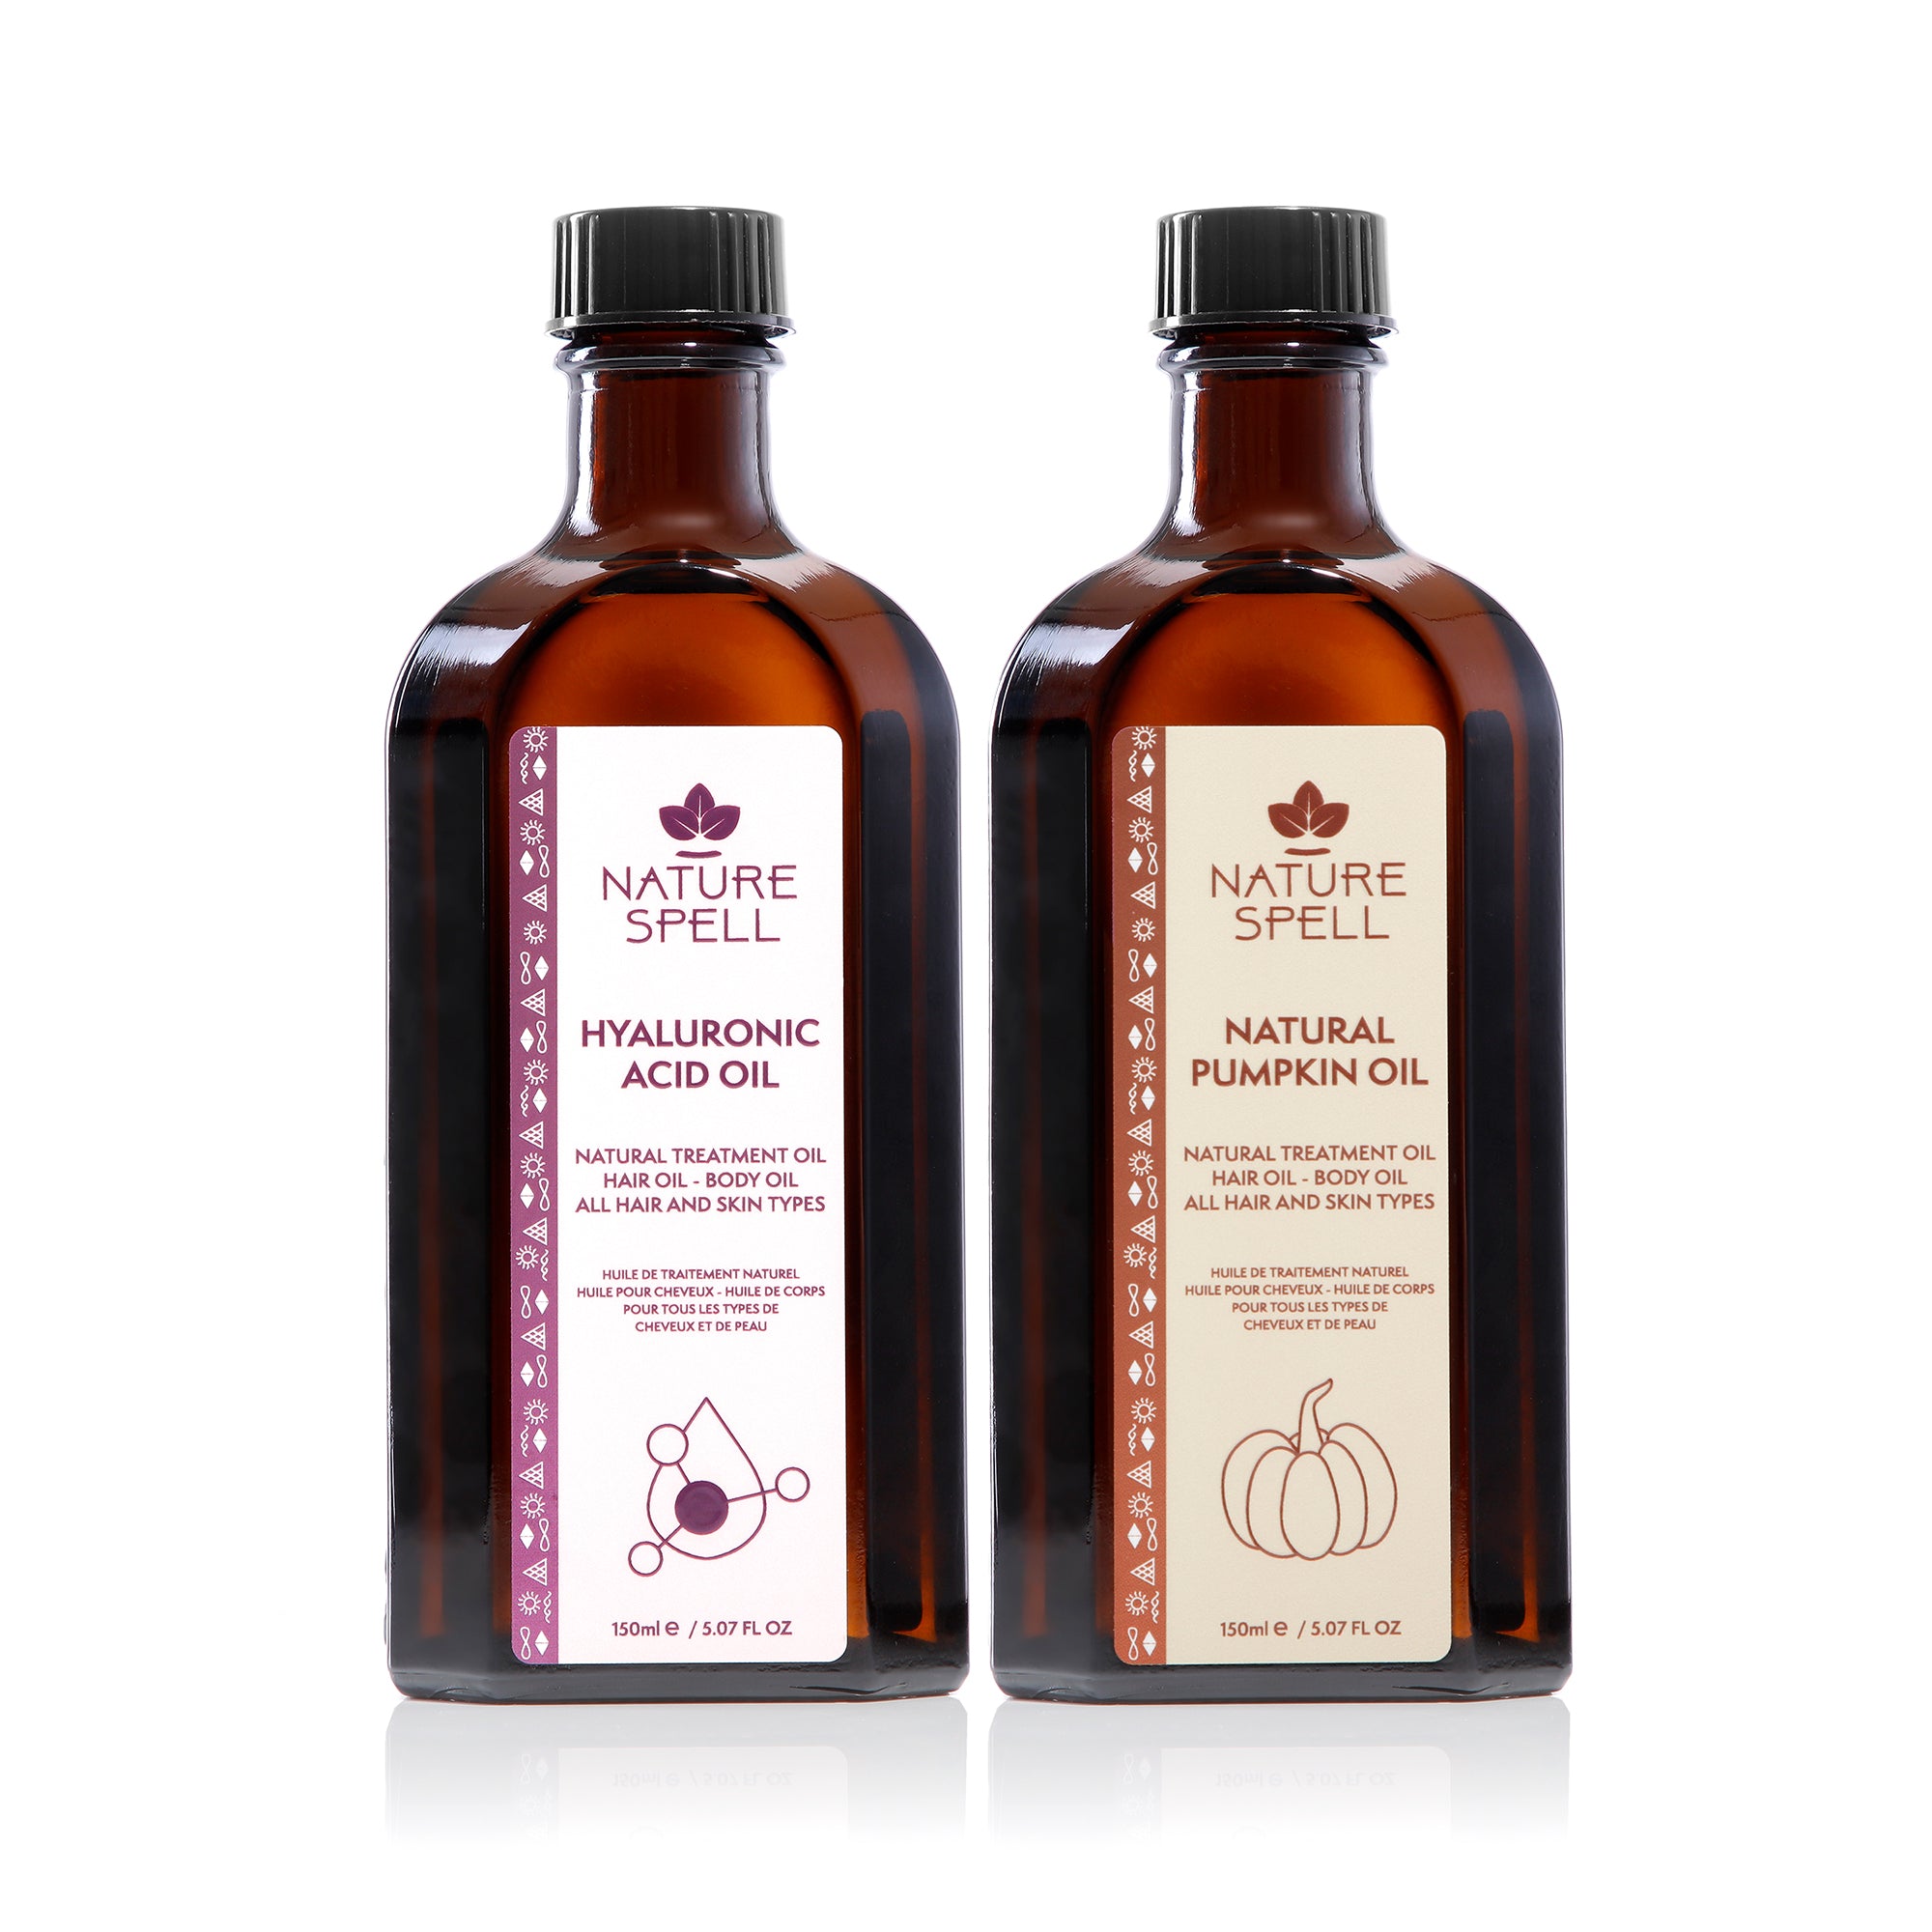 Duo Elixir: Hyaluronic Acid & Pumpkin Hair Oils - The Harmony of Hydration and Growth